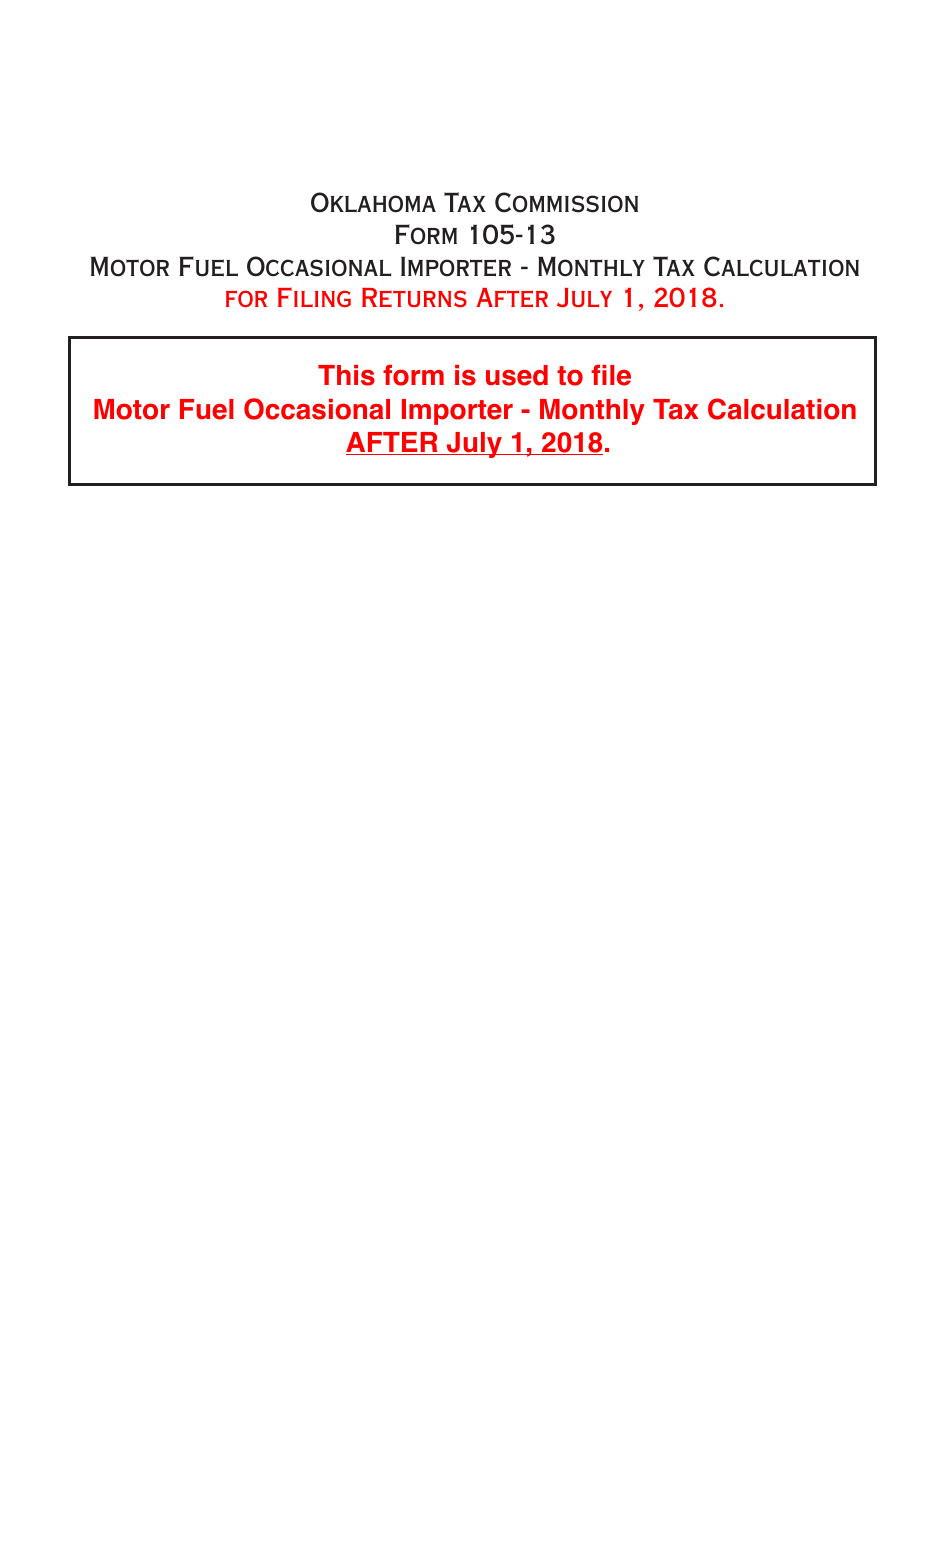 OTC Form DST-210 (105-13) Motor Fuel Occasional Importer - Monthly Tax Calculation - Oklahoma, Page 1